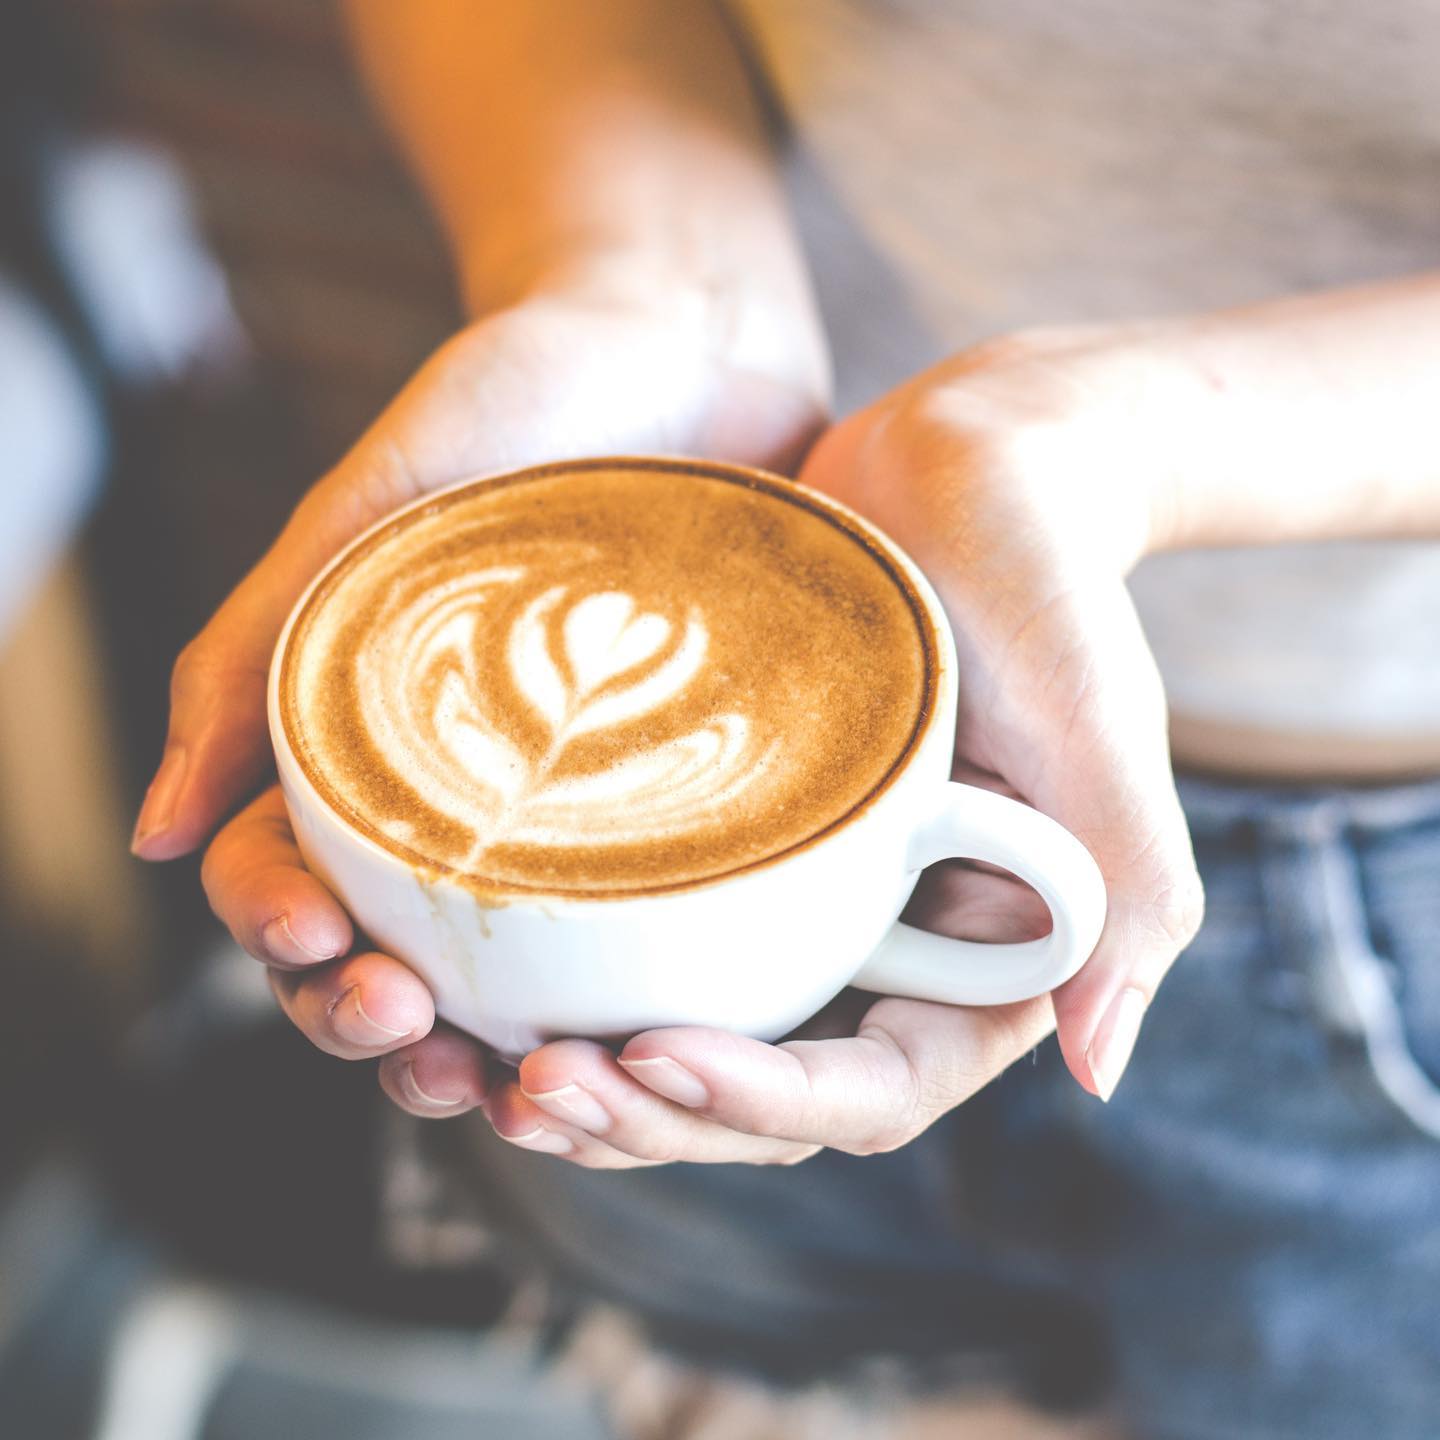 Visit Quad Cities Launches QC Coffee Trail ☕️ Attention, caffeine fiends: @visitquadcities has launched the new QC Coffee Trail, which spotlights nearly 30 local coffee shops and cafés in the Quad Cities regional destination. Read more at FabulousIowa.com.